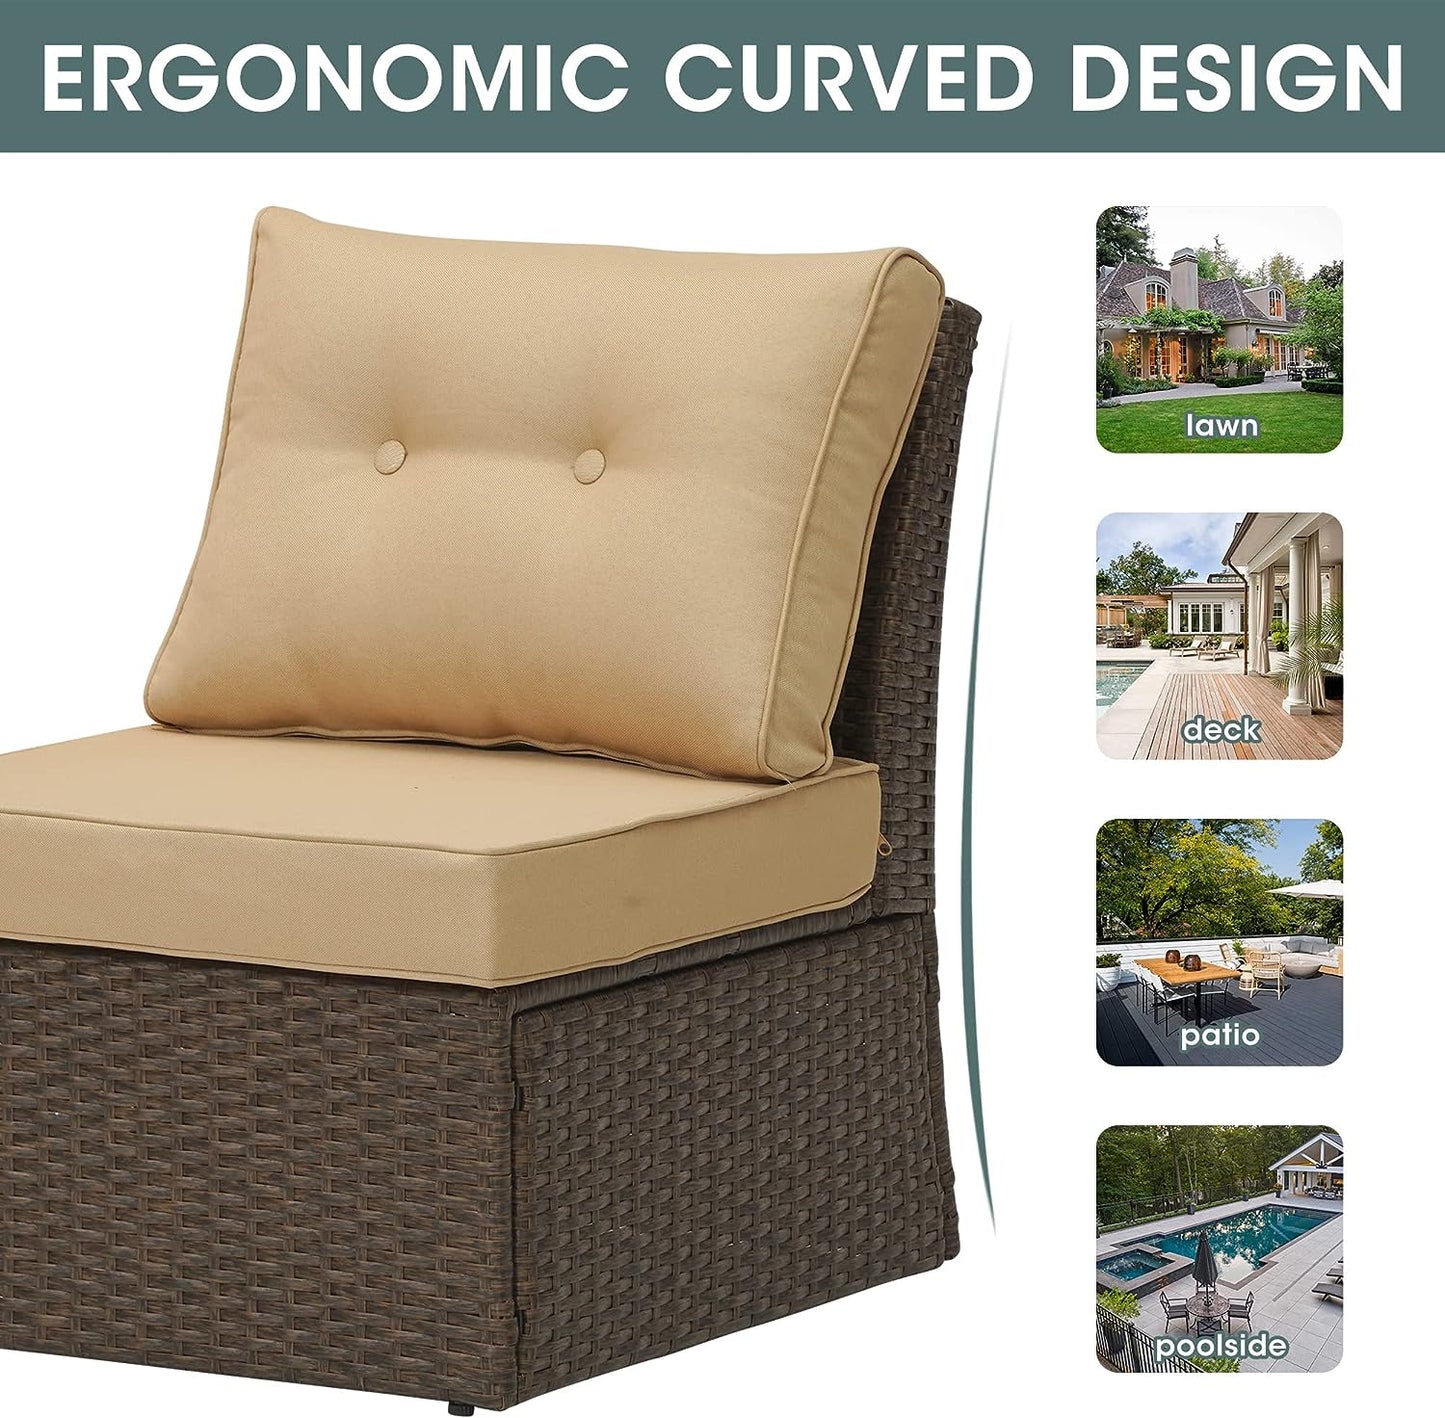 SUNVIVI OUTDOOR Brown Wicker Patio Sofa Chair Armless with Beige Cushions, Aluminum Frame Small Outdoor Couch Chair for Garden Backyard Pool,1 Piece